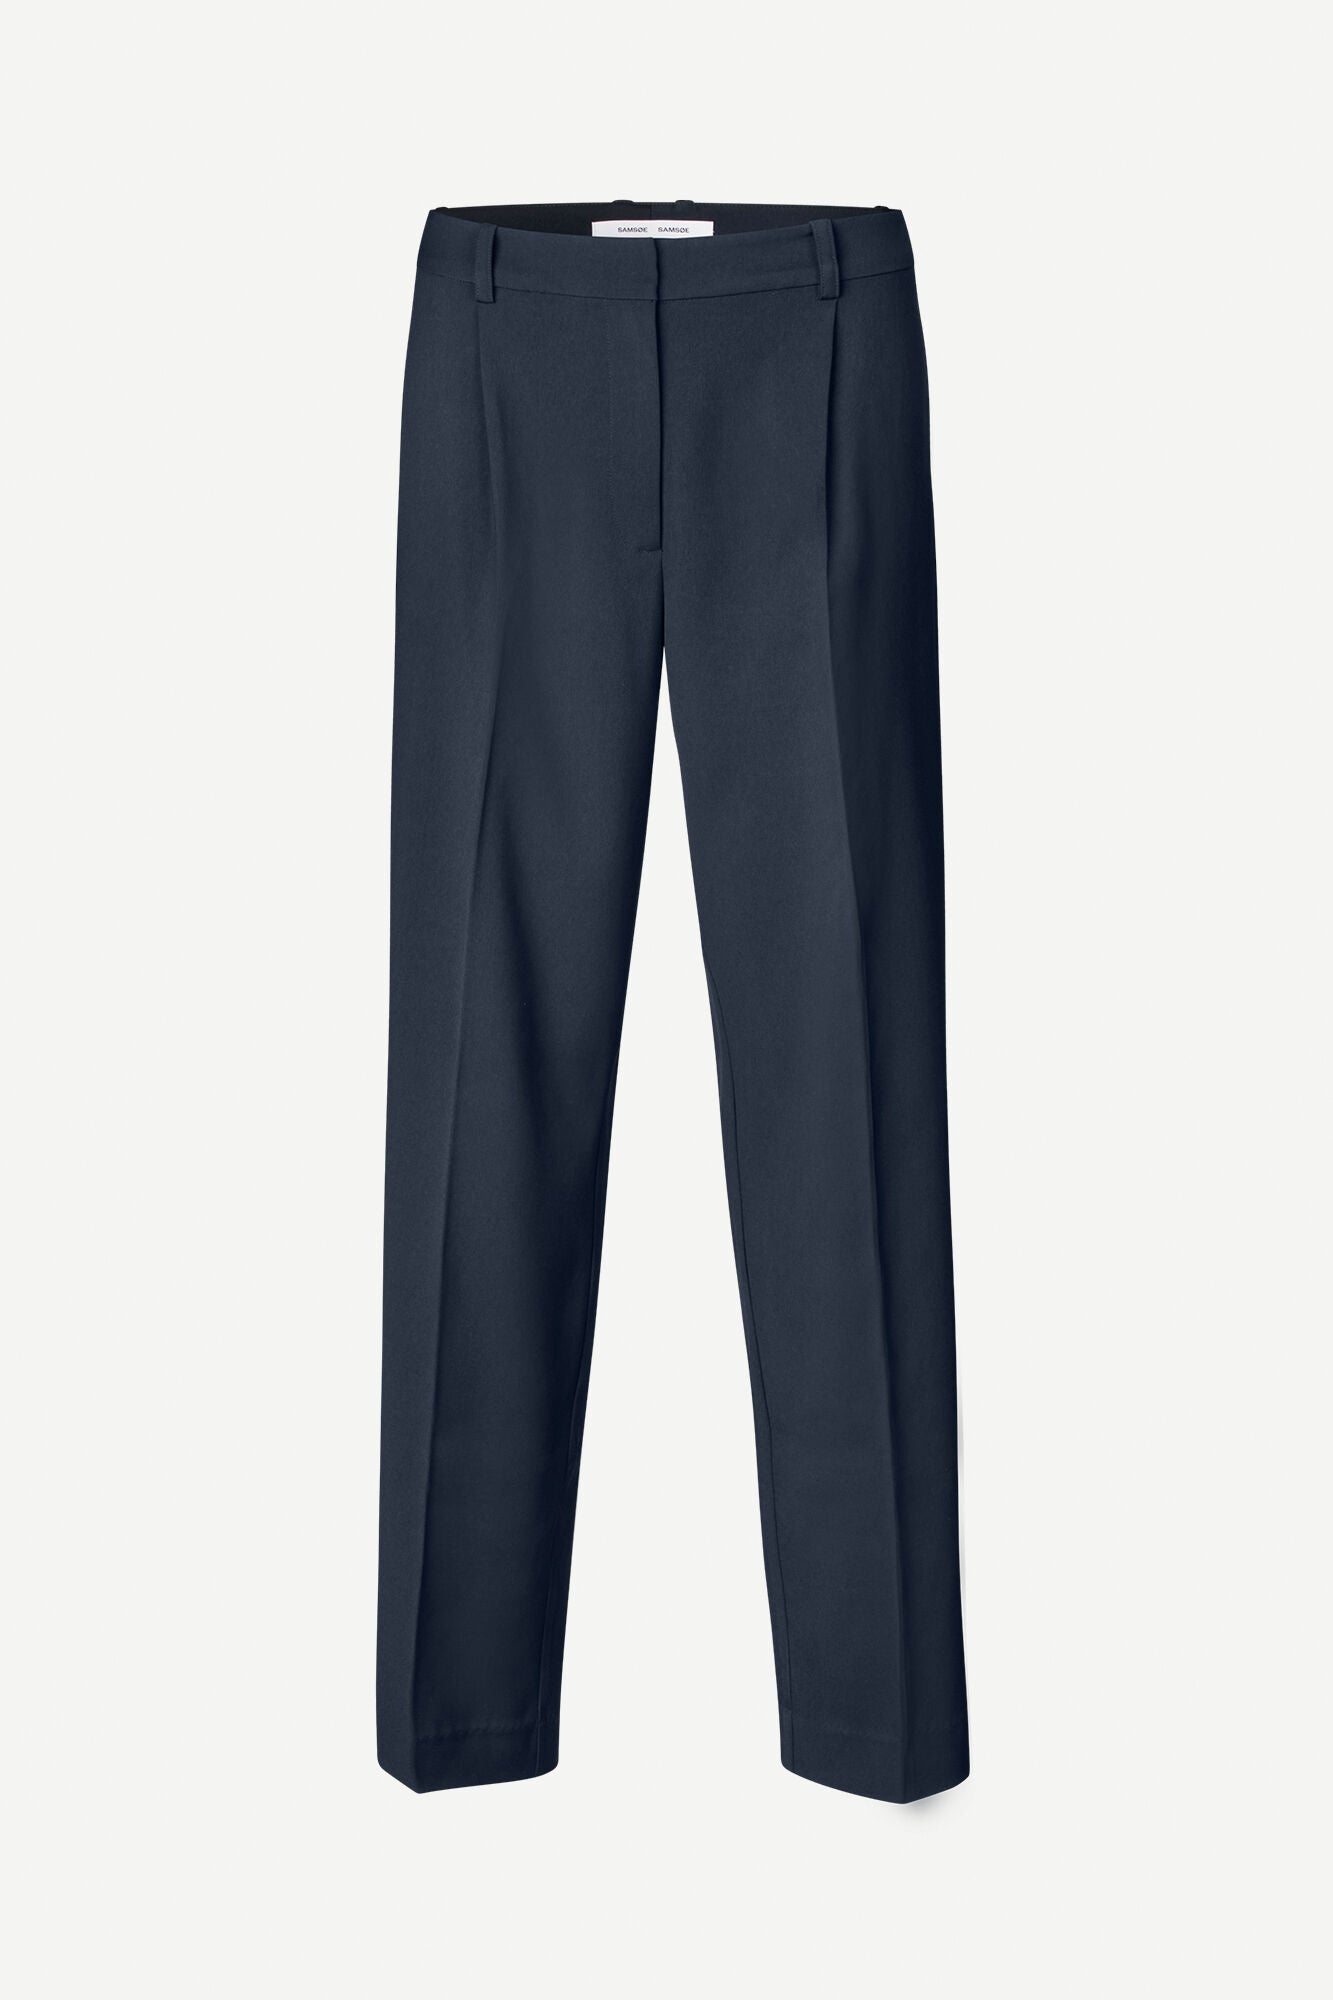 Pleated suiting pants in salute